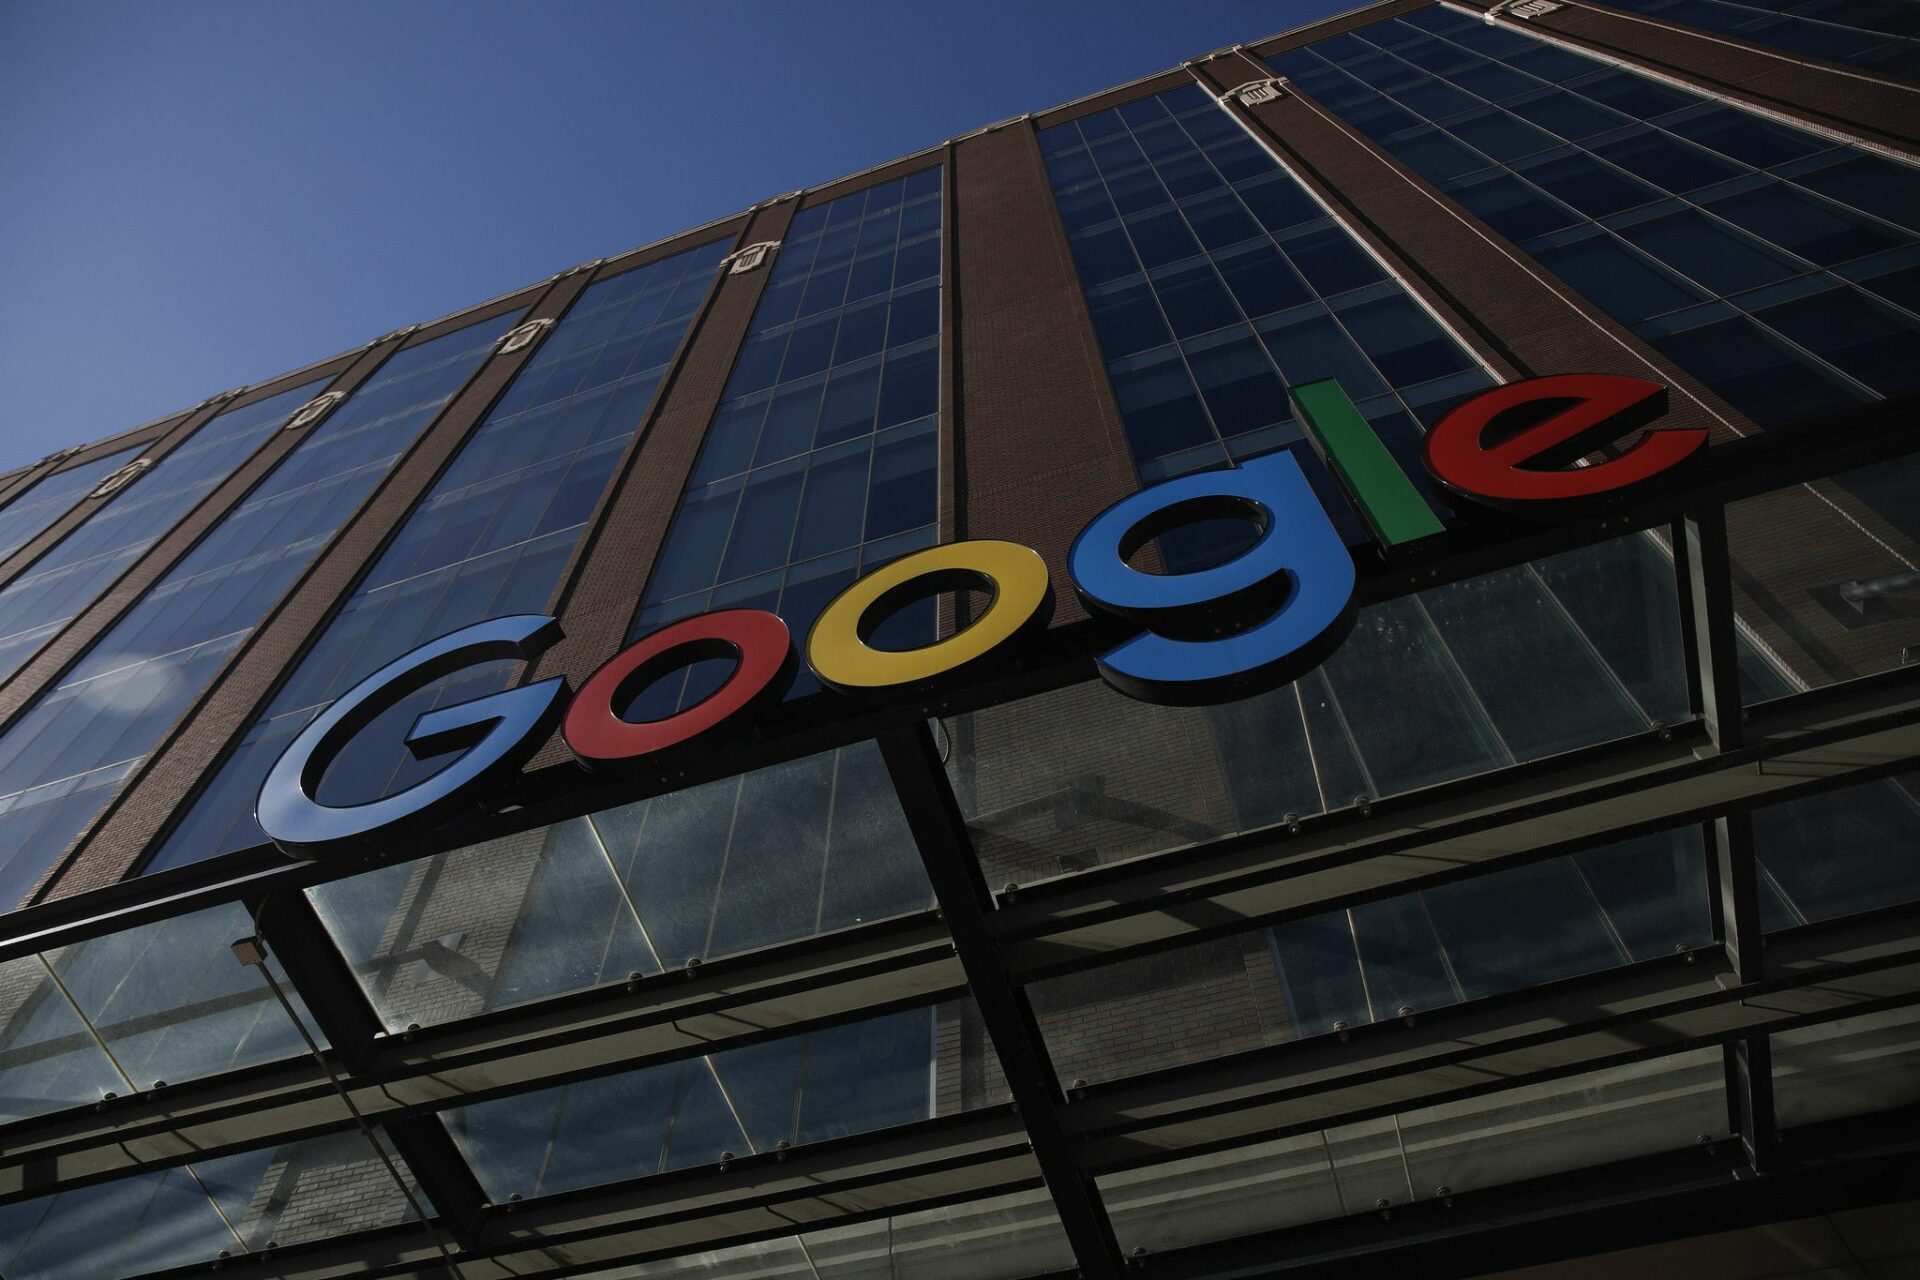 Hamas praises Google employee who quit over Israel military project